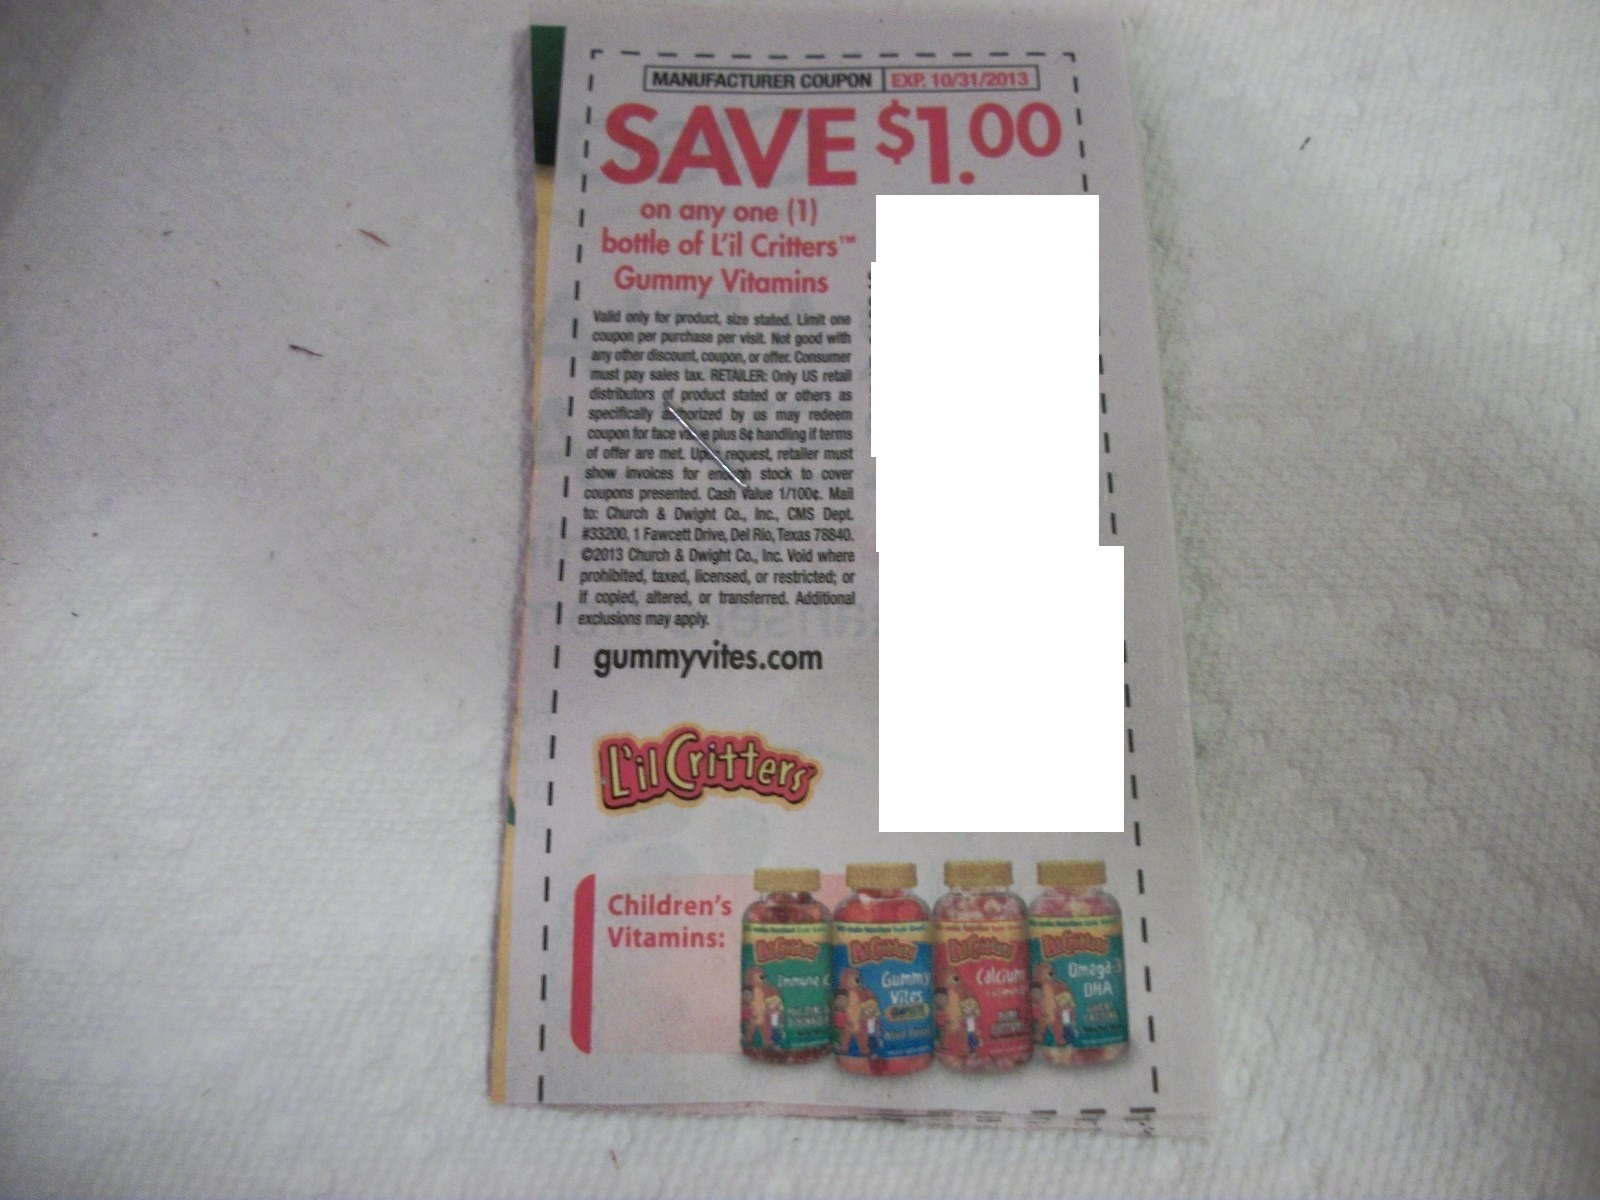 Save $1.00 on any one (1) bottle of L'il Critters Gummy Vitamins Expires 10/31/2013